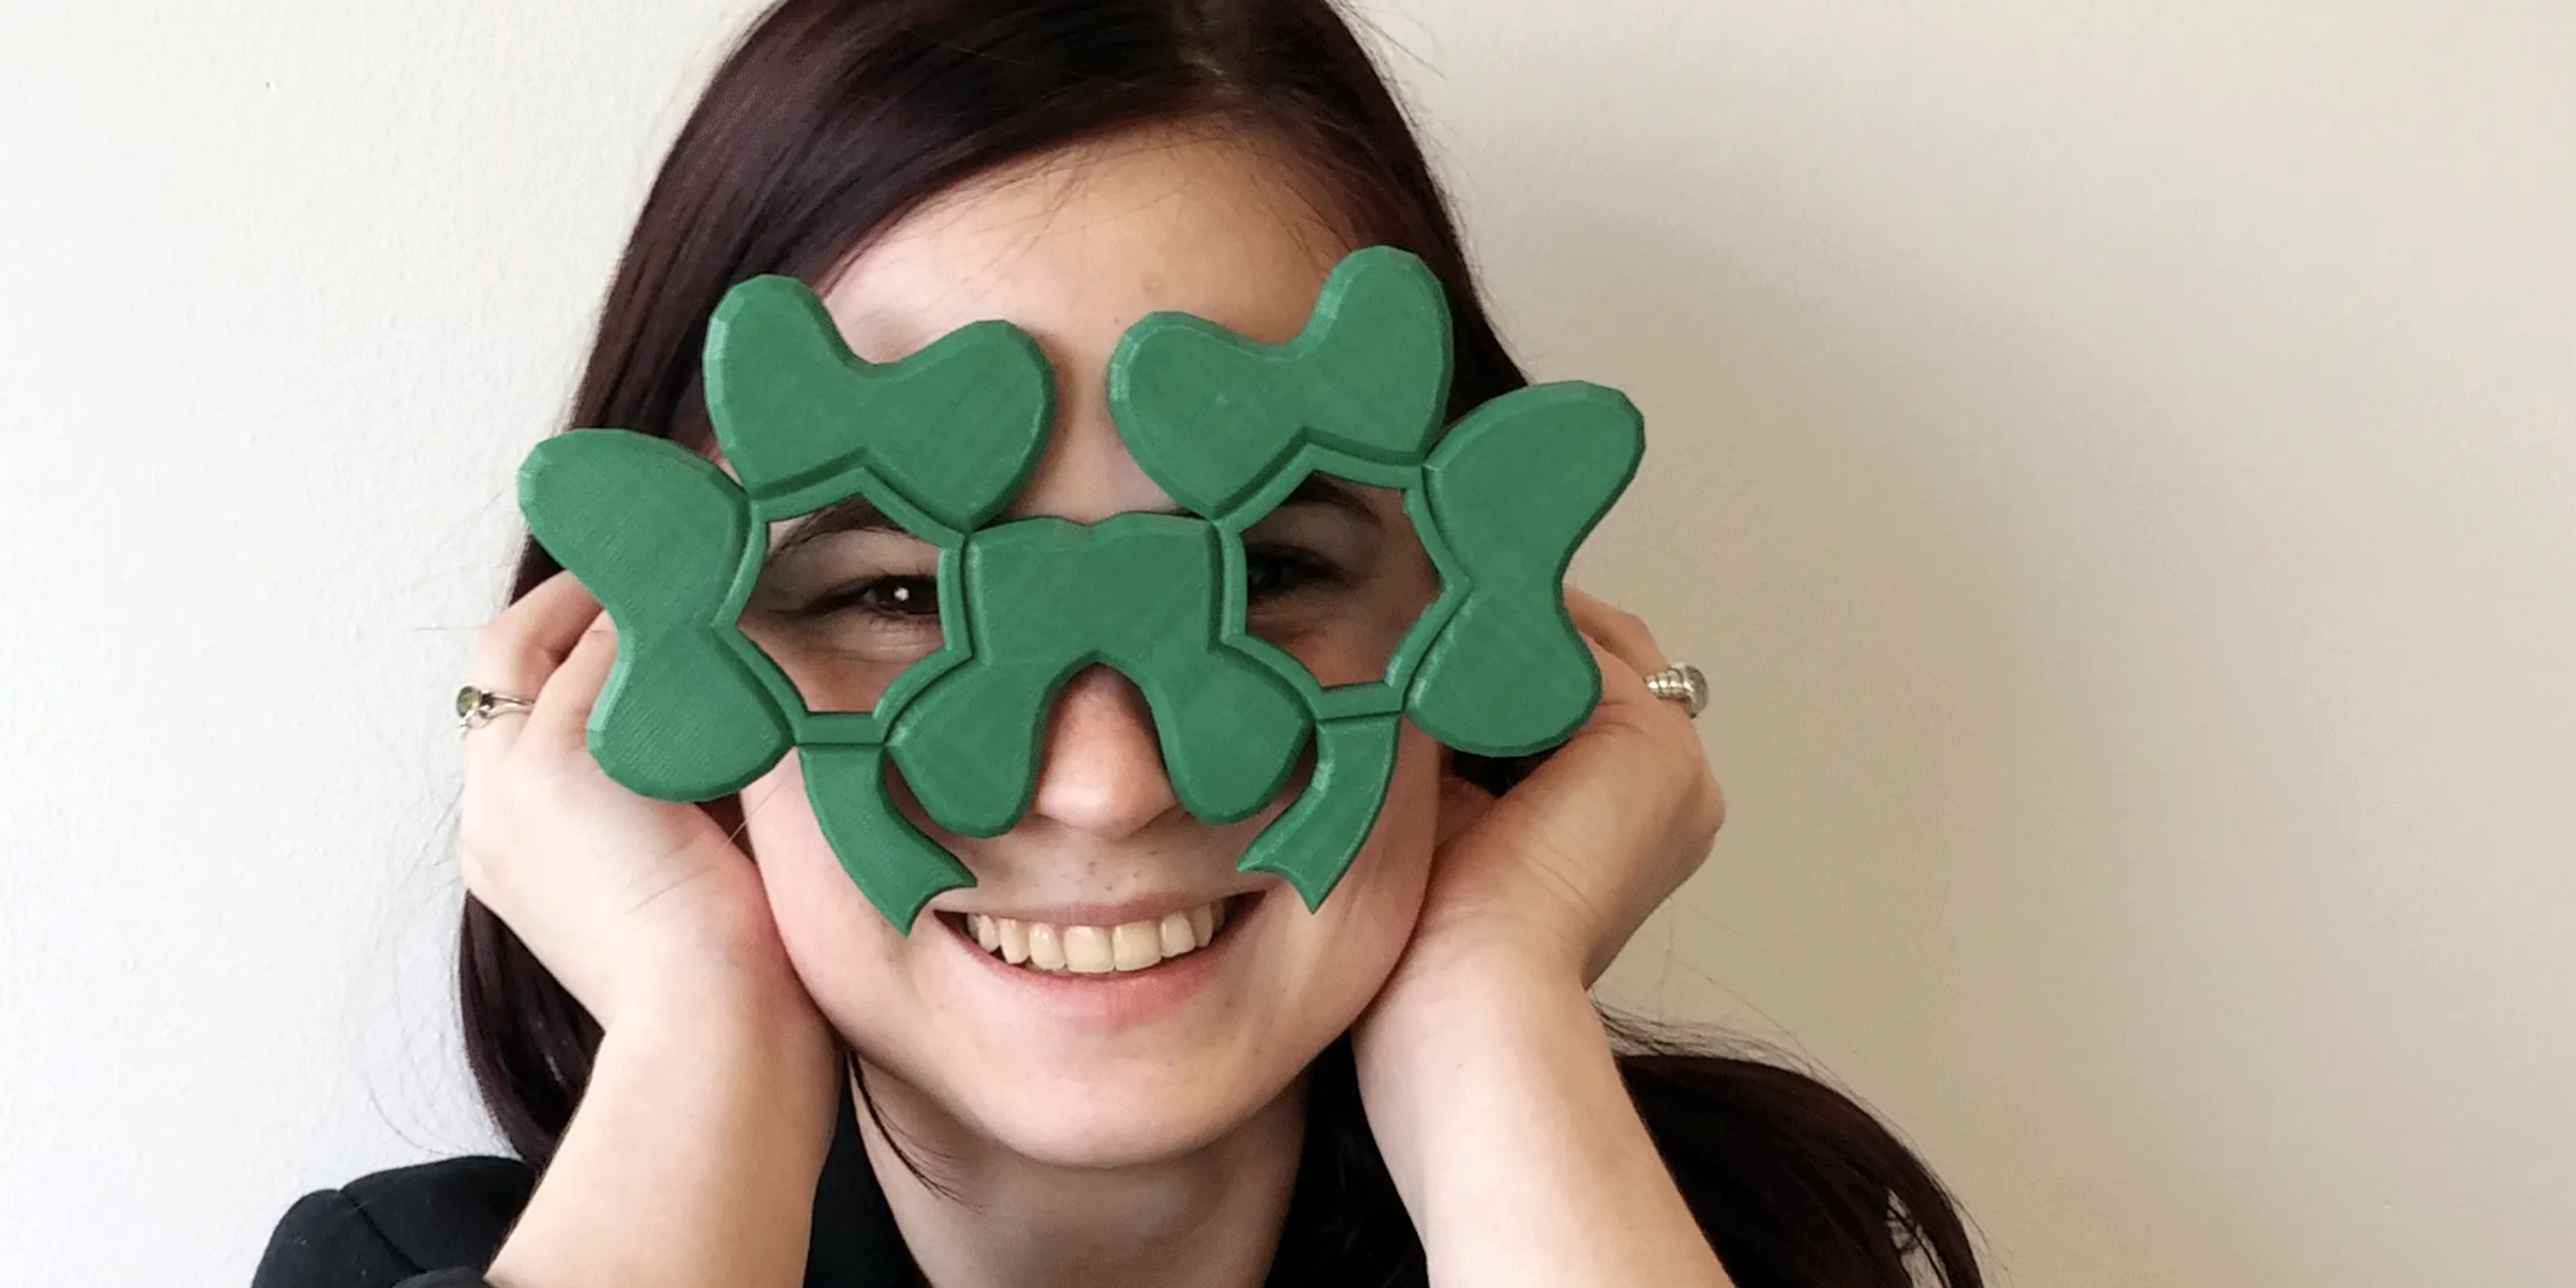 Find here a selection of the best 3D models of creations related to St. Patrick's Day 3D printable